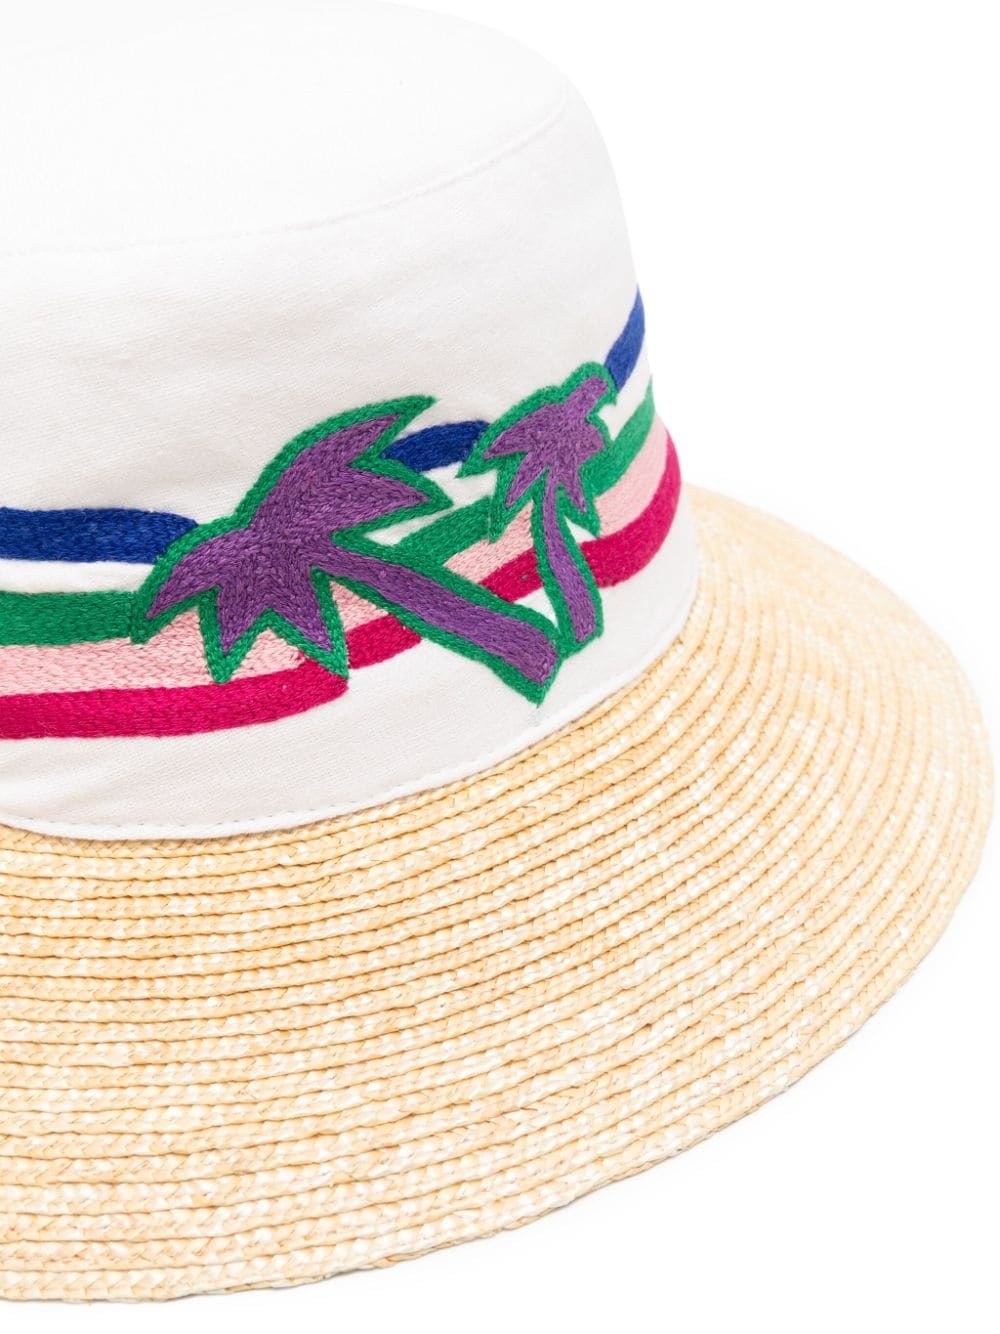 Palm Tree-embroidered sun hat - 2